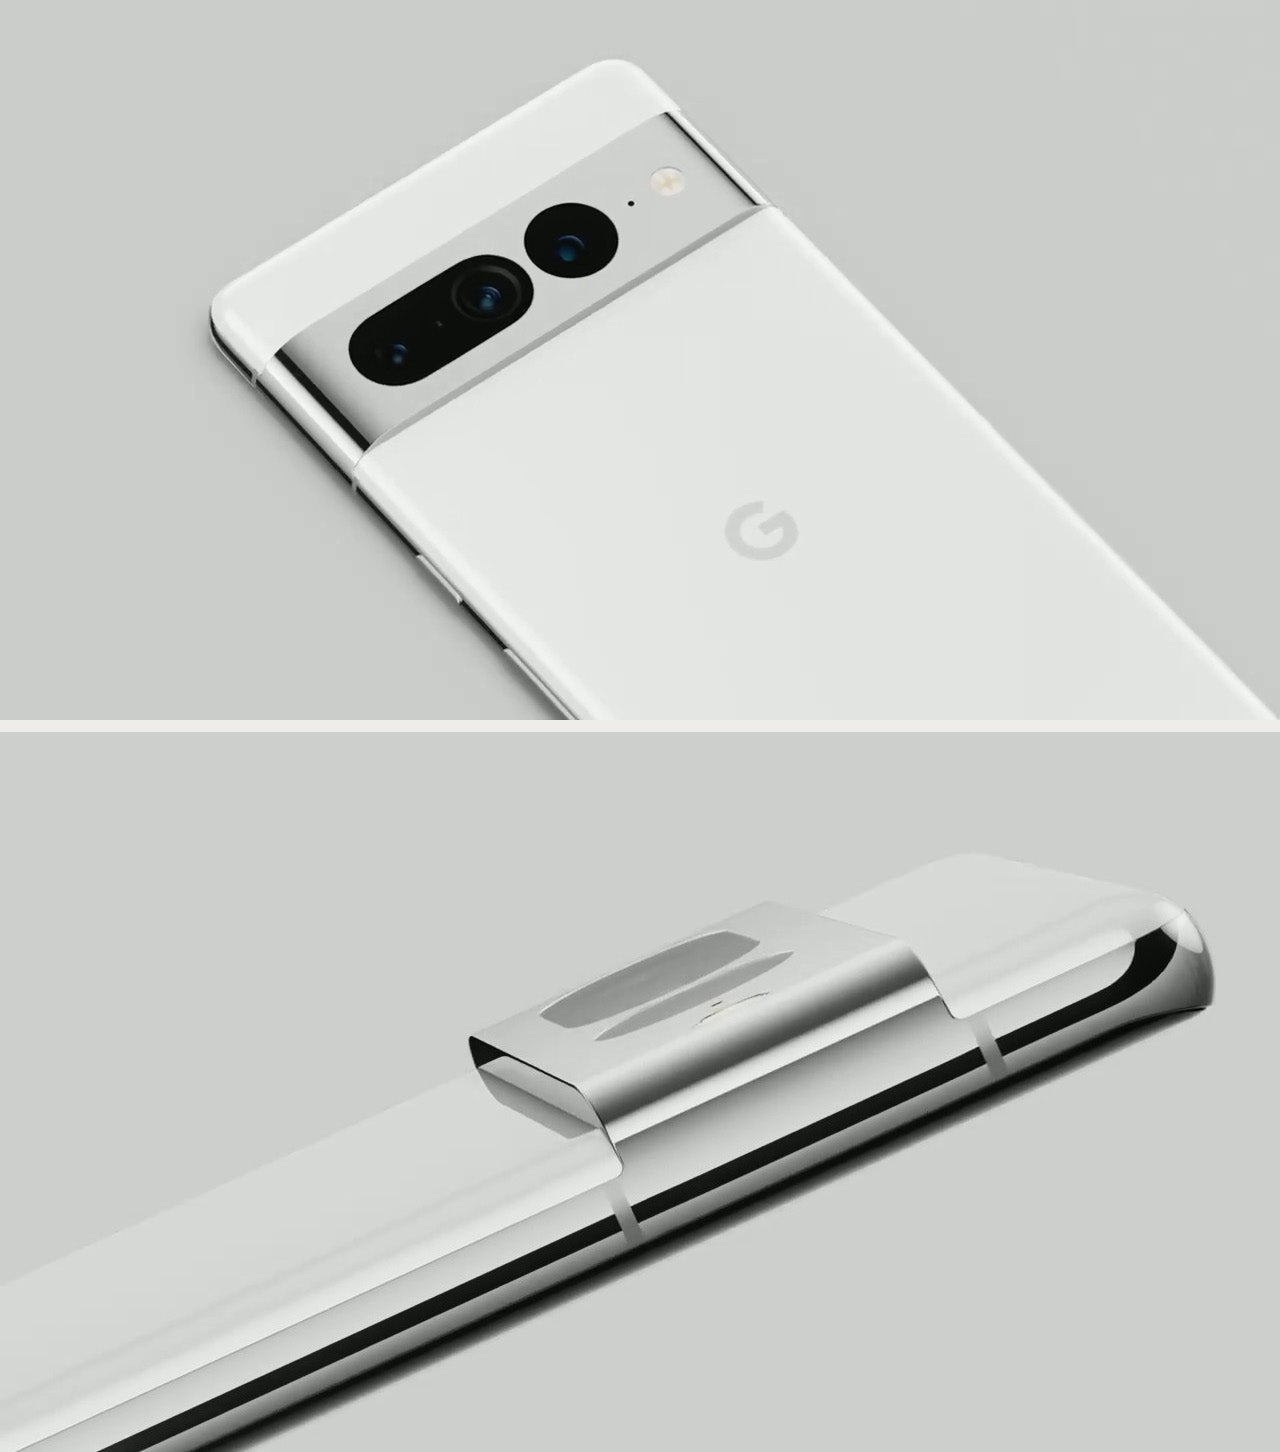  The Pixel 7 Pro (shown) and Pixel 7 will share an even larger, all-aluminum camera bar. Google